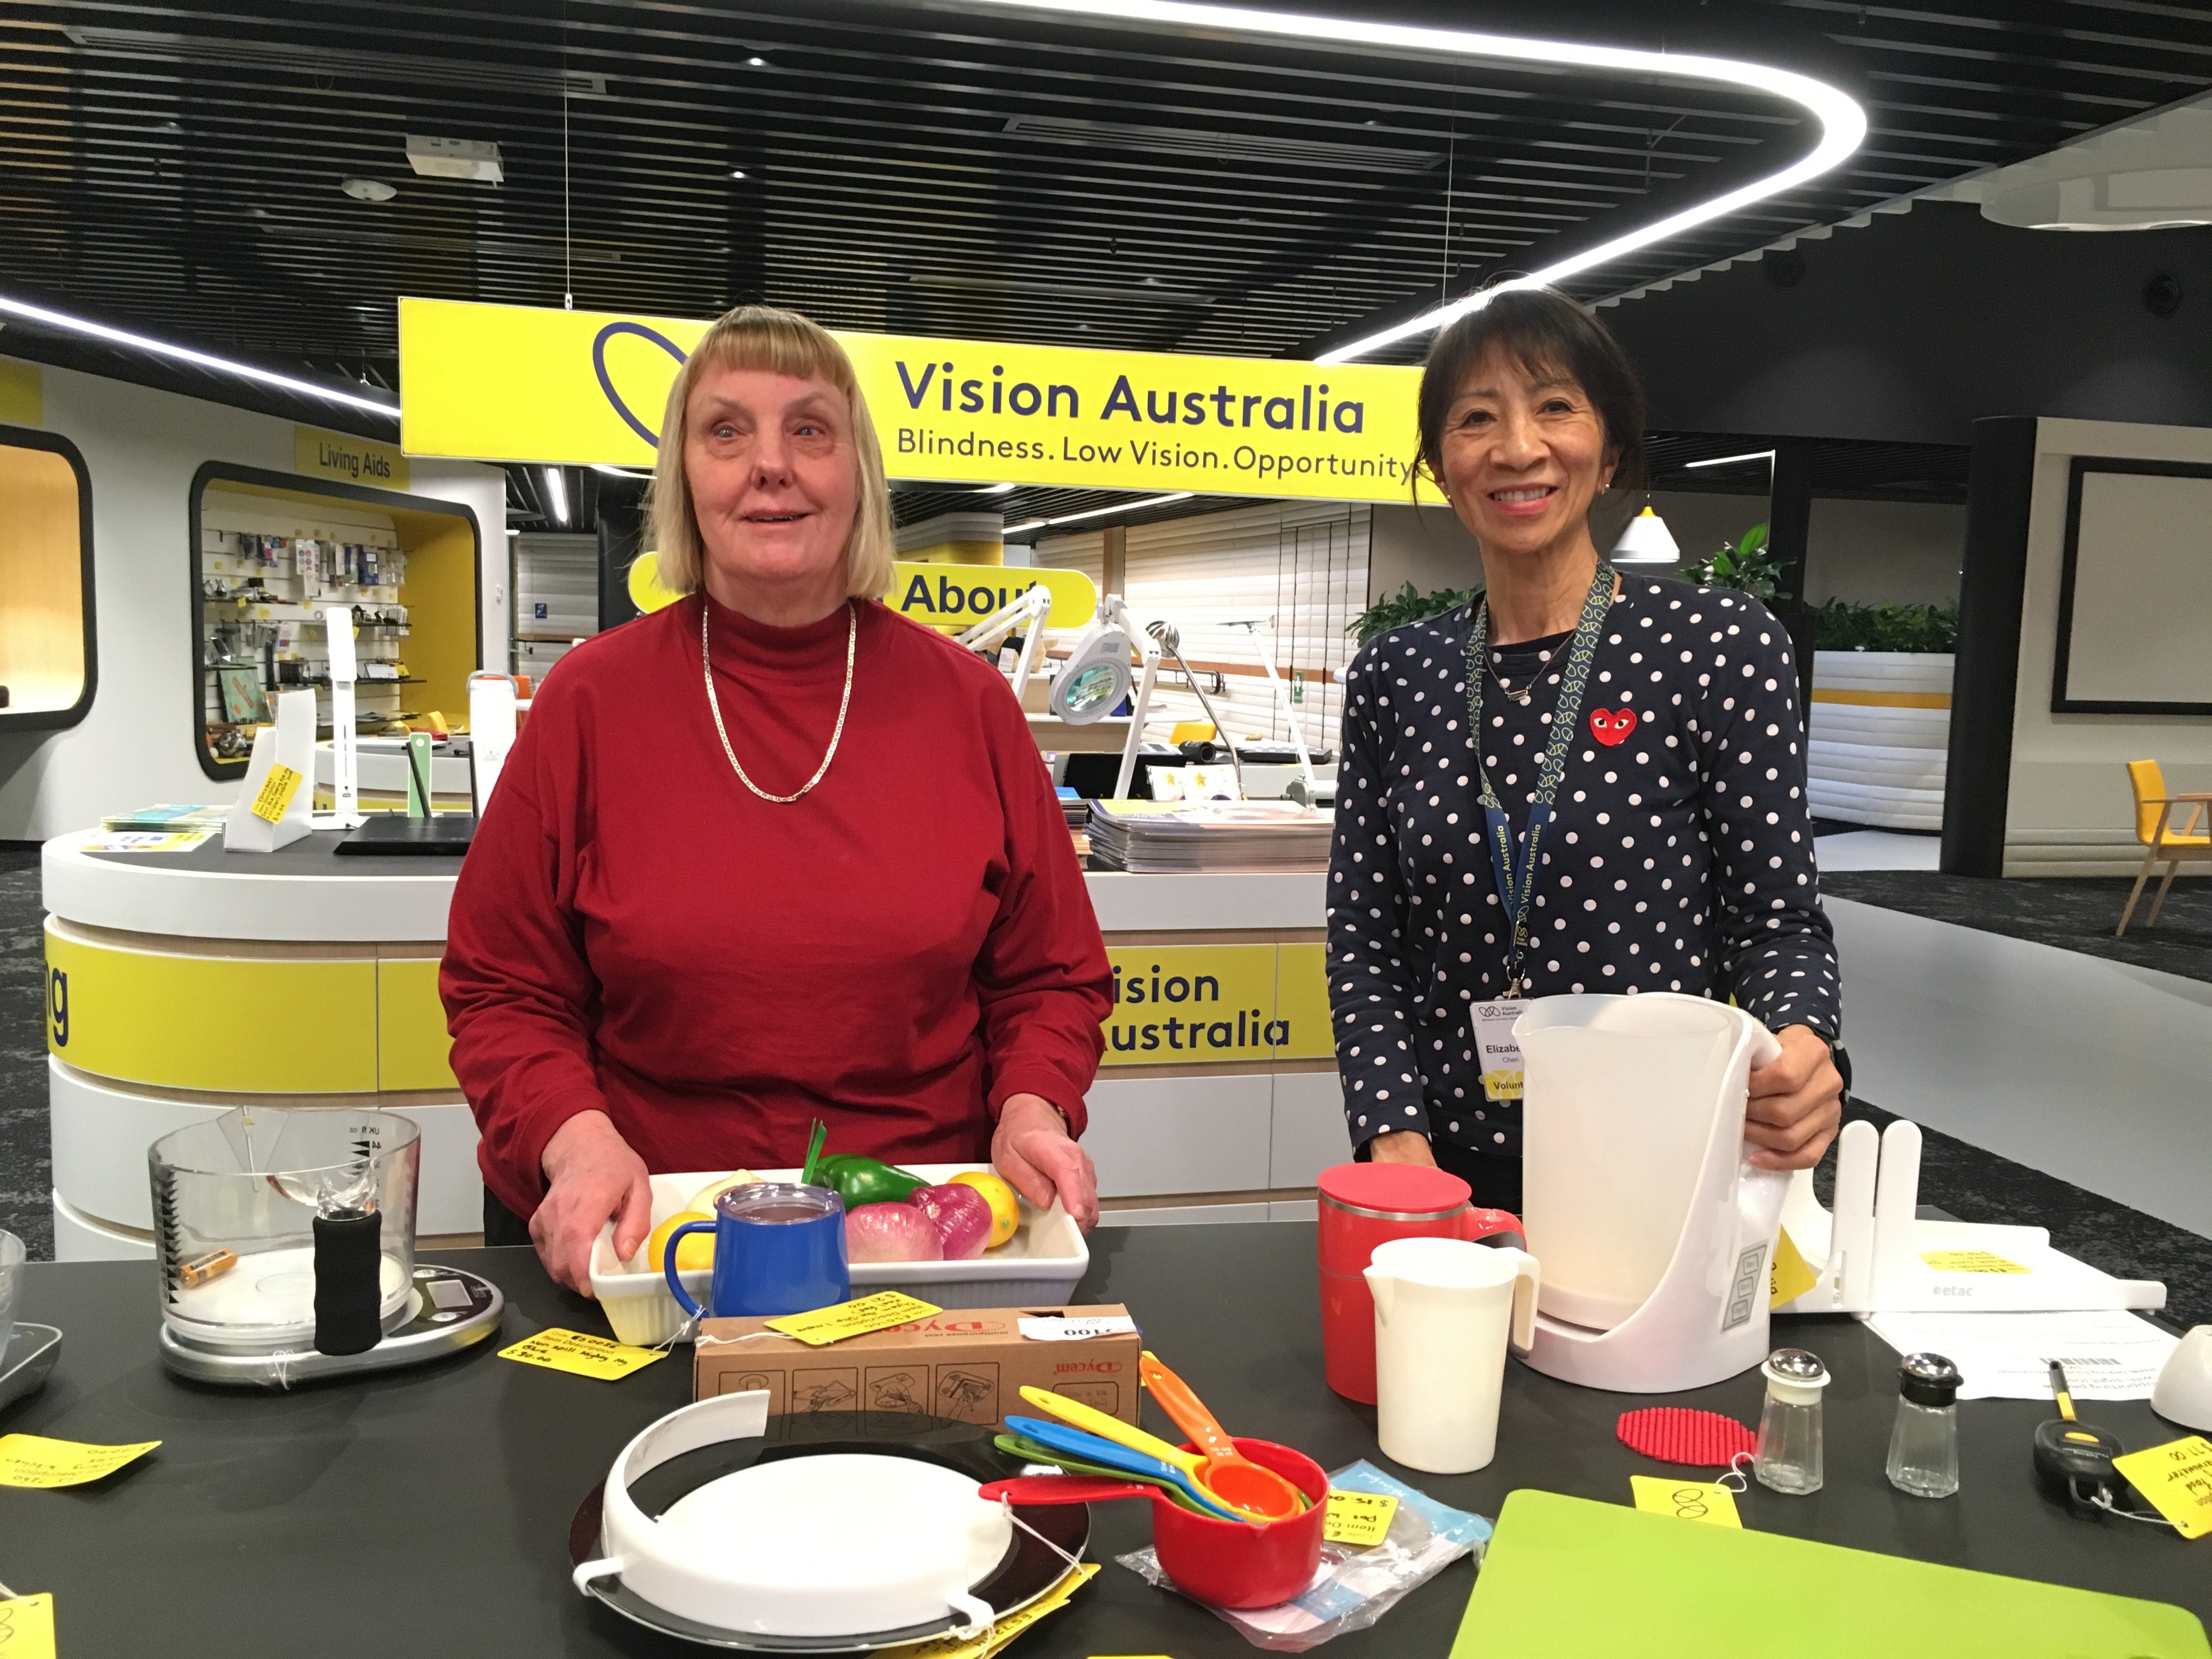 Food for Thought presenters Joy Nuske and Liz Chen in the Vision Australia Store kitchen with various cooking utensils in front of them